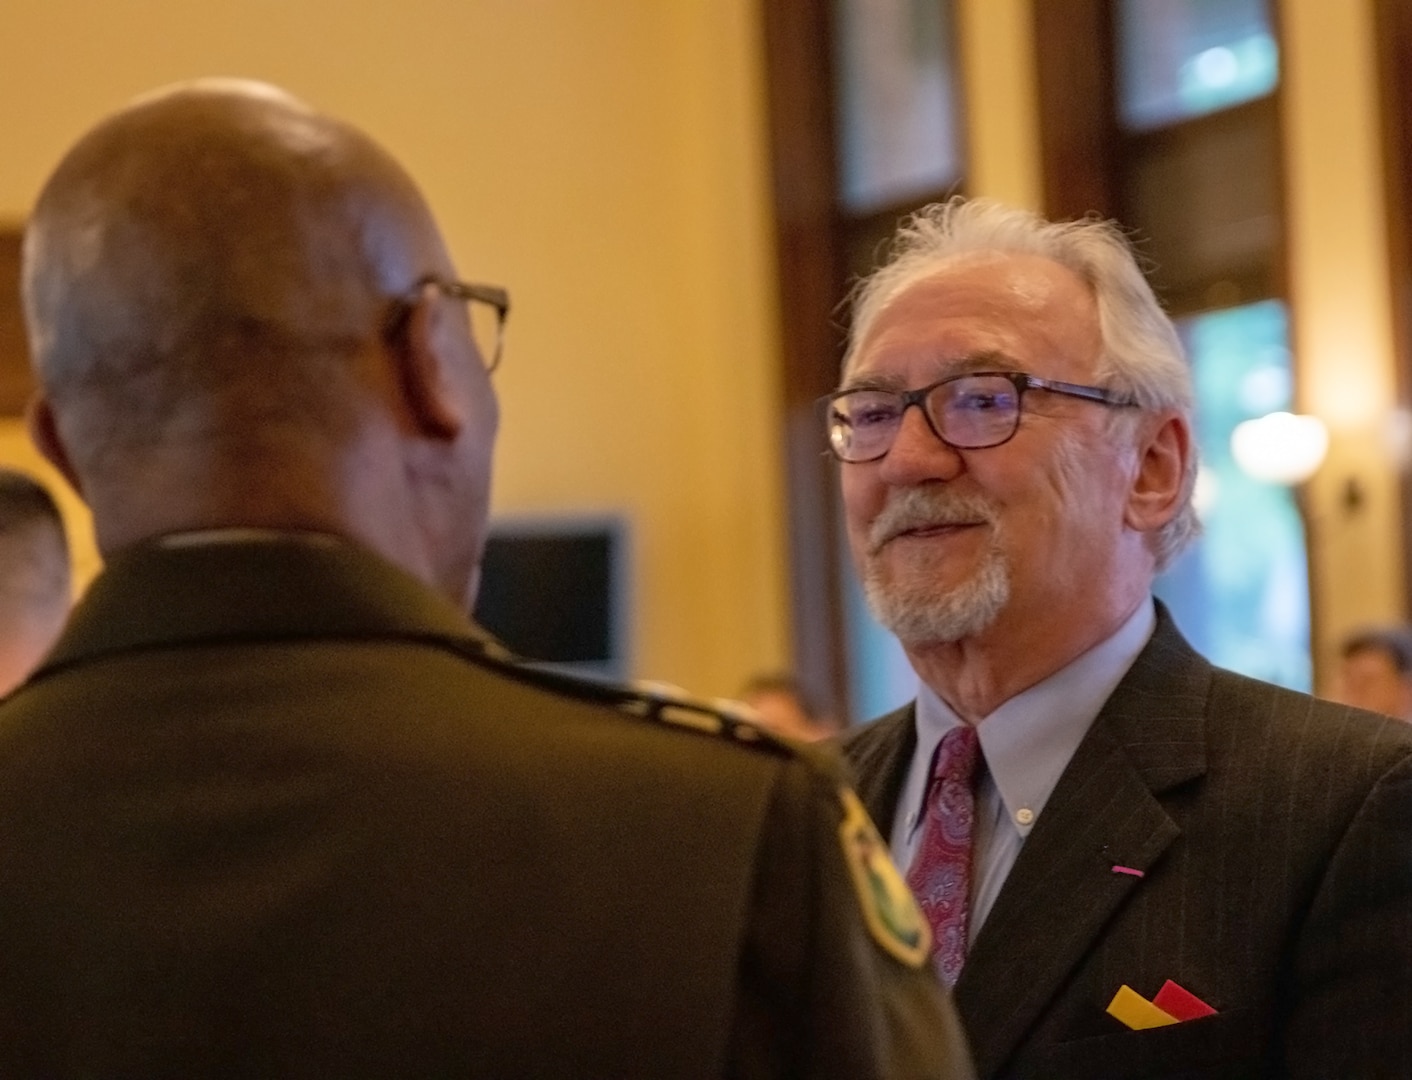 Patrick Van Nevel, Honorary Consul of the Kingdom of Belgium, talks with Maj. Gen. Rodney Boyd, Assistant Adjutant General-Army and Commander of the Illinois Army National Guard, during a ceremony commemorating the 78th anniversary of the rescue of King Leopold III from German Nazis during World War II by Soldiers from the Illinois Army National Guard’s 106th Cavalry Regiment and marking the 300th birthday of the Illinois National Guard in Springfield May 6.